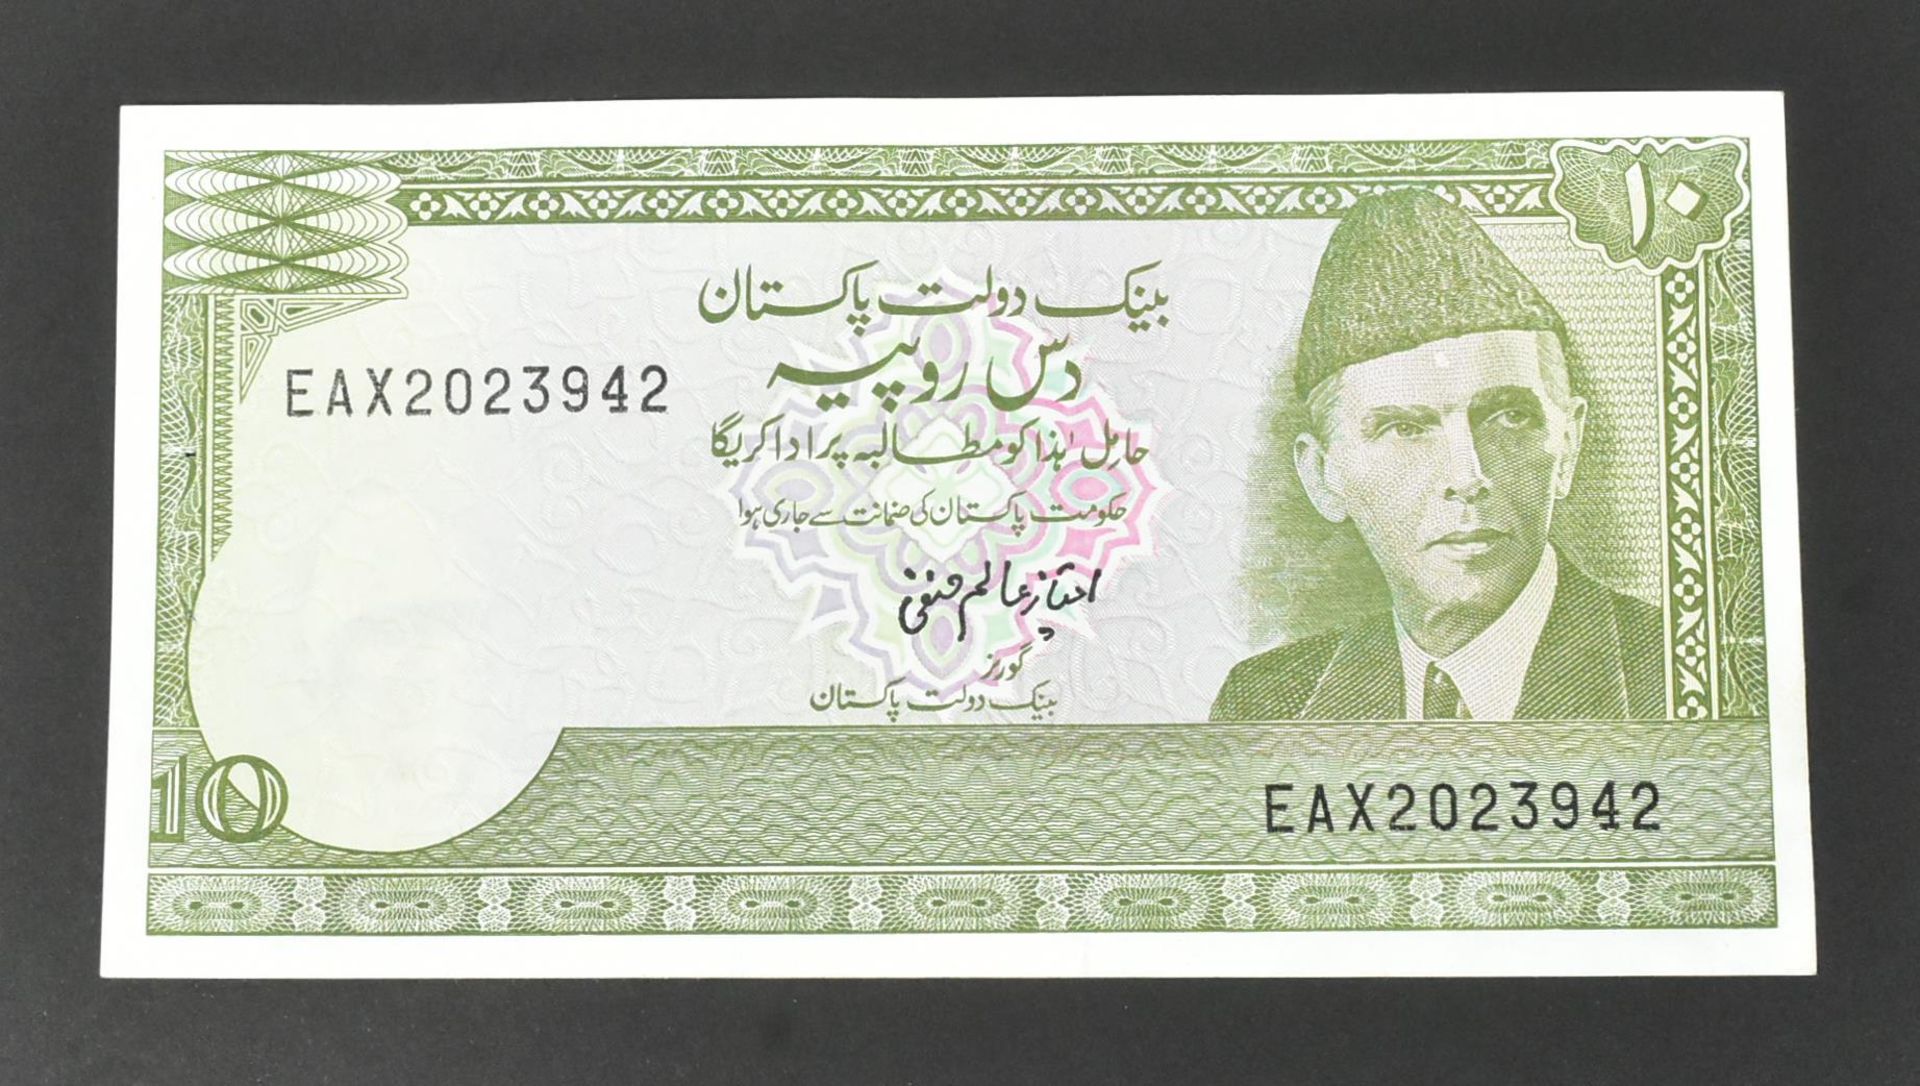 COLLECTION OF INTERNATIONAL UNCIRCULATED BANK NOTES - OMAN - Image 46 of 51